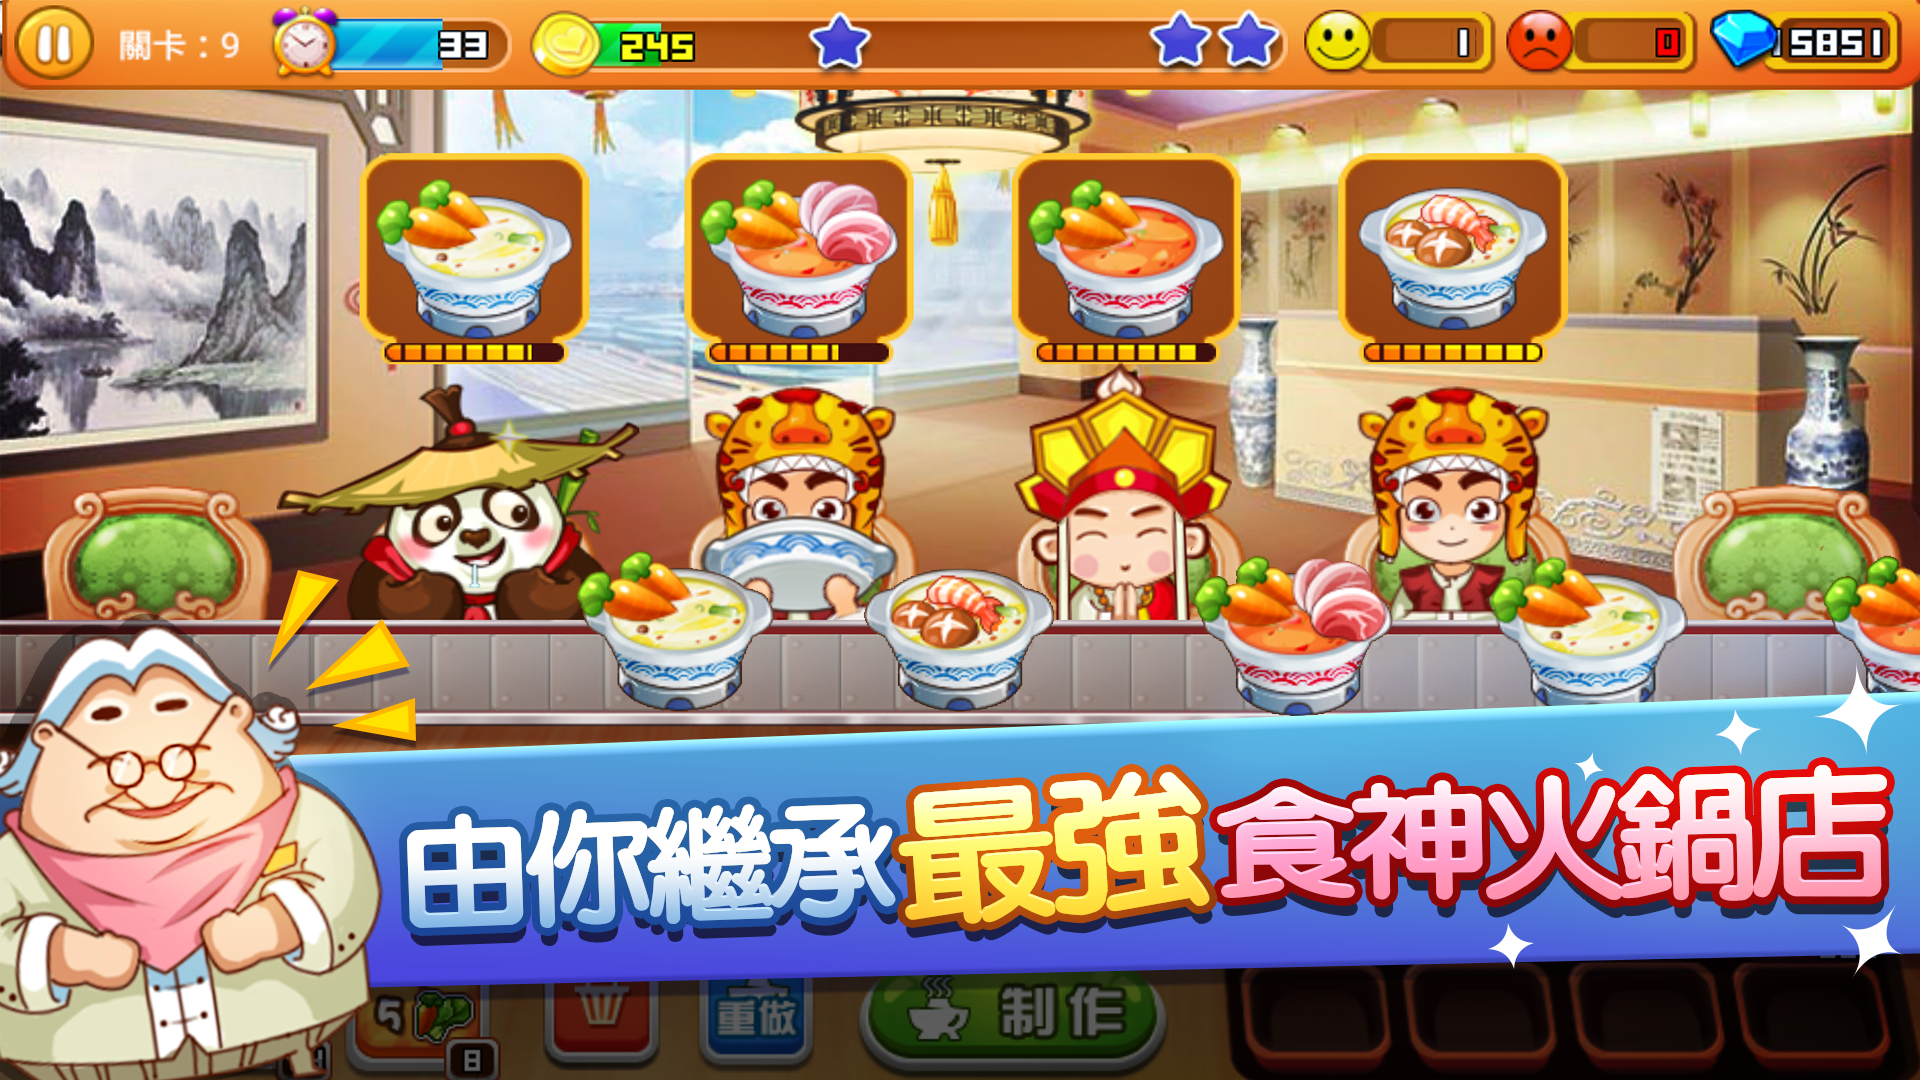  Recommended download of cooking mobile games